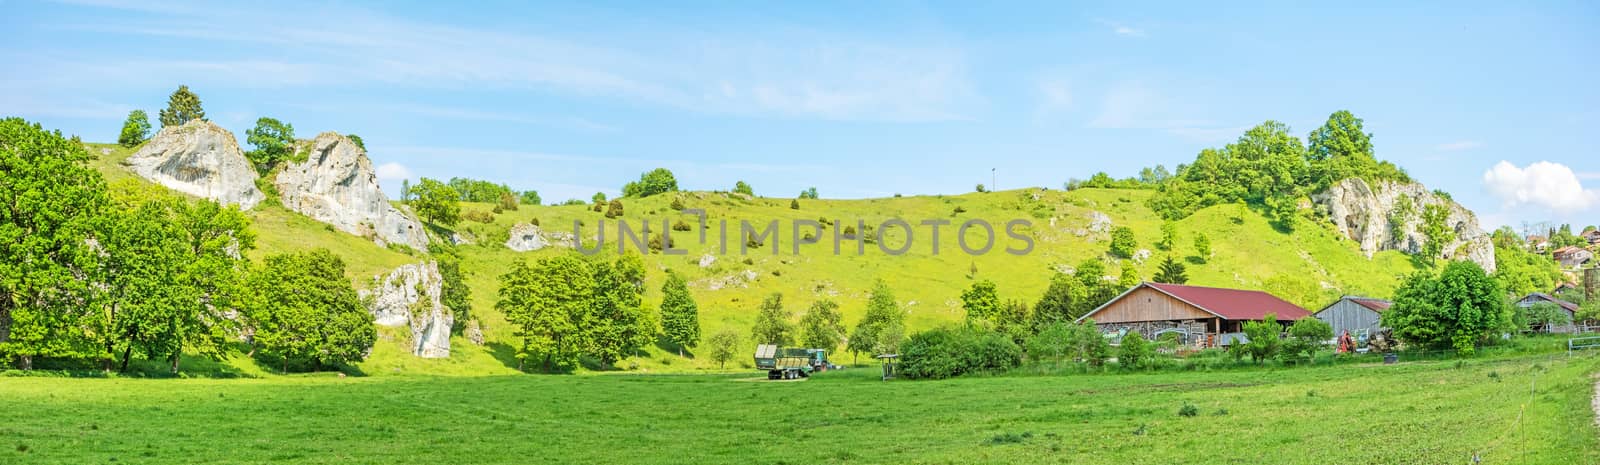 Rural panorama - farm at the impressive rocks of valley Eselsburger Tal near river Brenz - jewel of the swabian alps, meadow in front